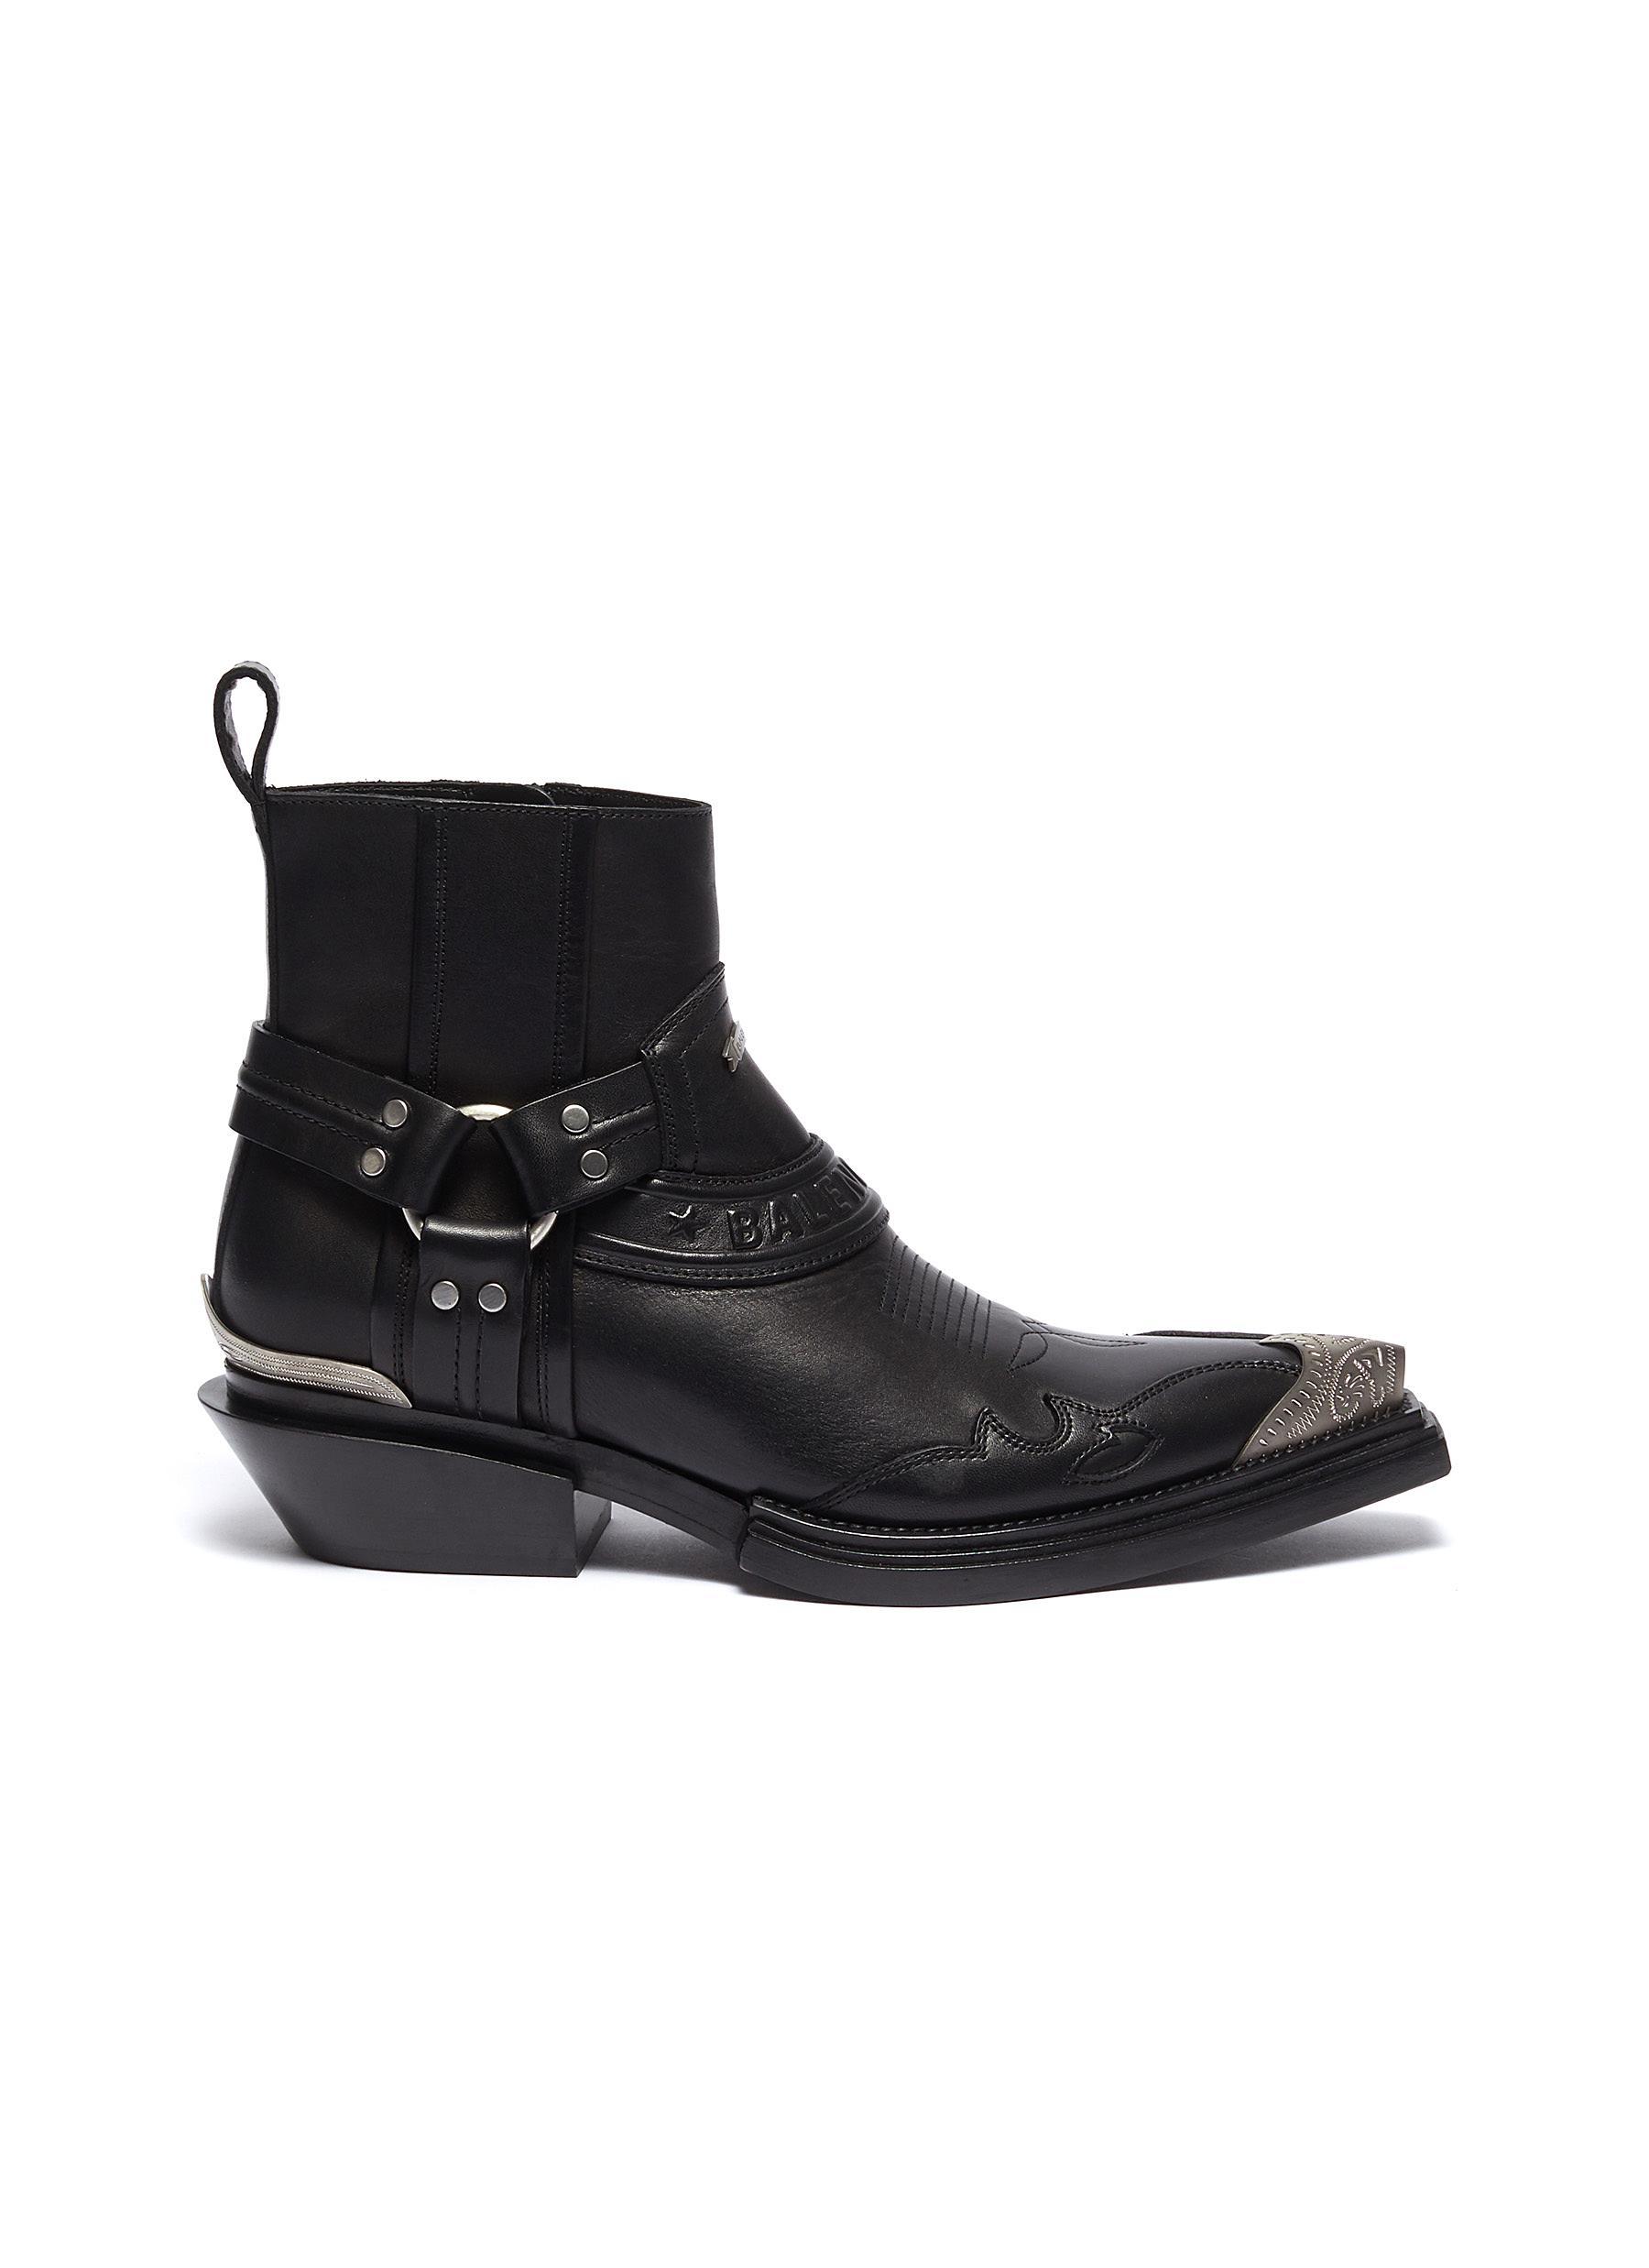 Balenciaga 'santiag' Metal Toe Cap Leather Ankle Boots in Black | Lyst